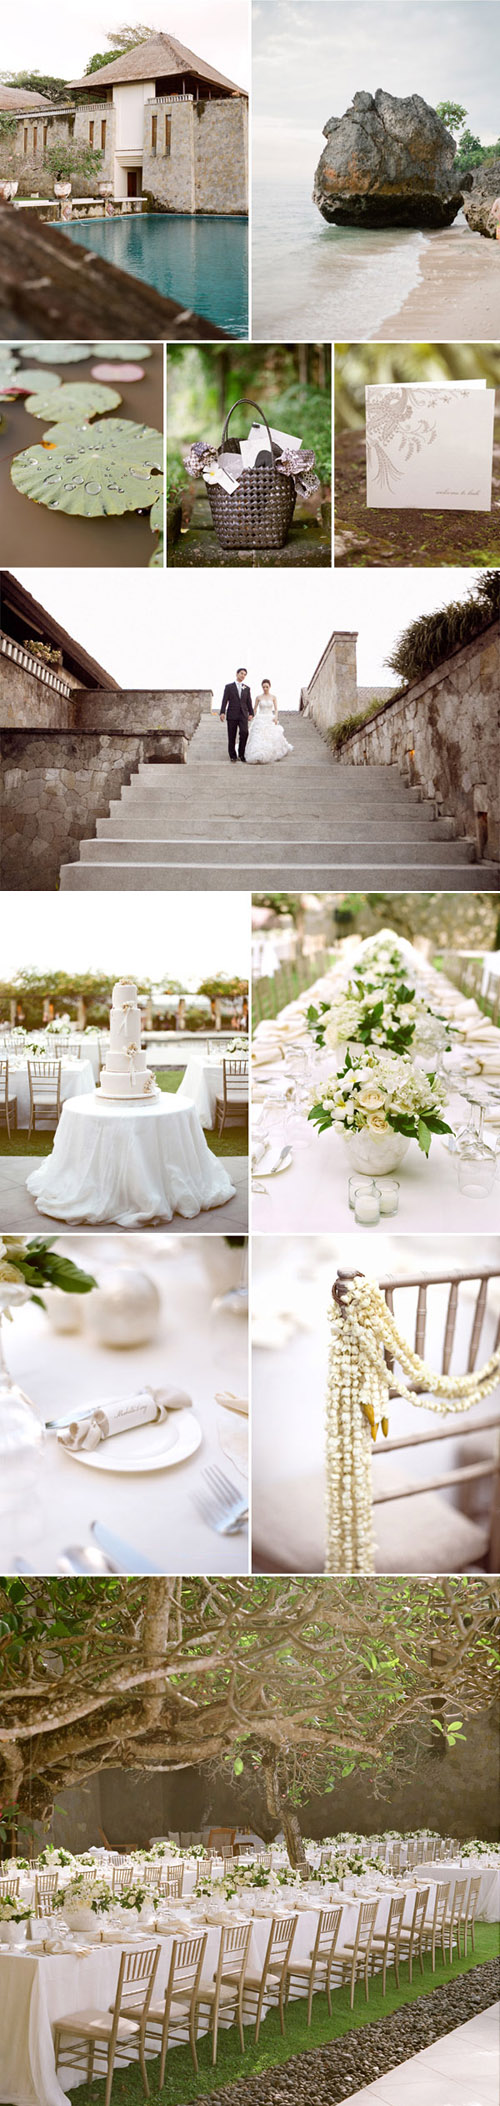 romantic French-inspired Bali destination wedding from Lisa Vorce of Oh How Charming! photographed by Aaron Delesie